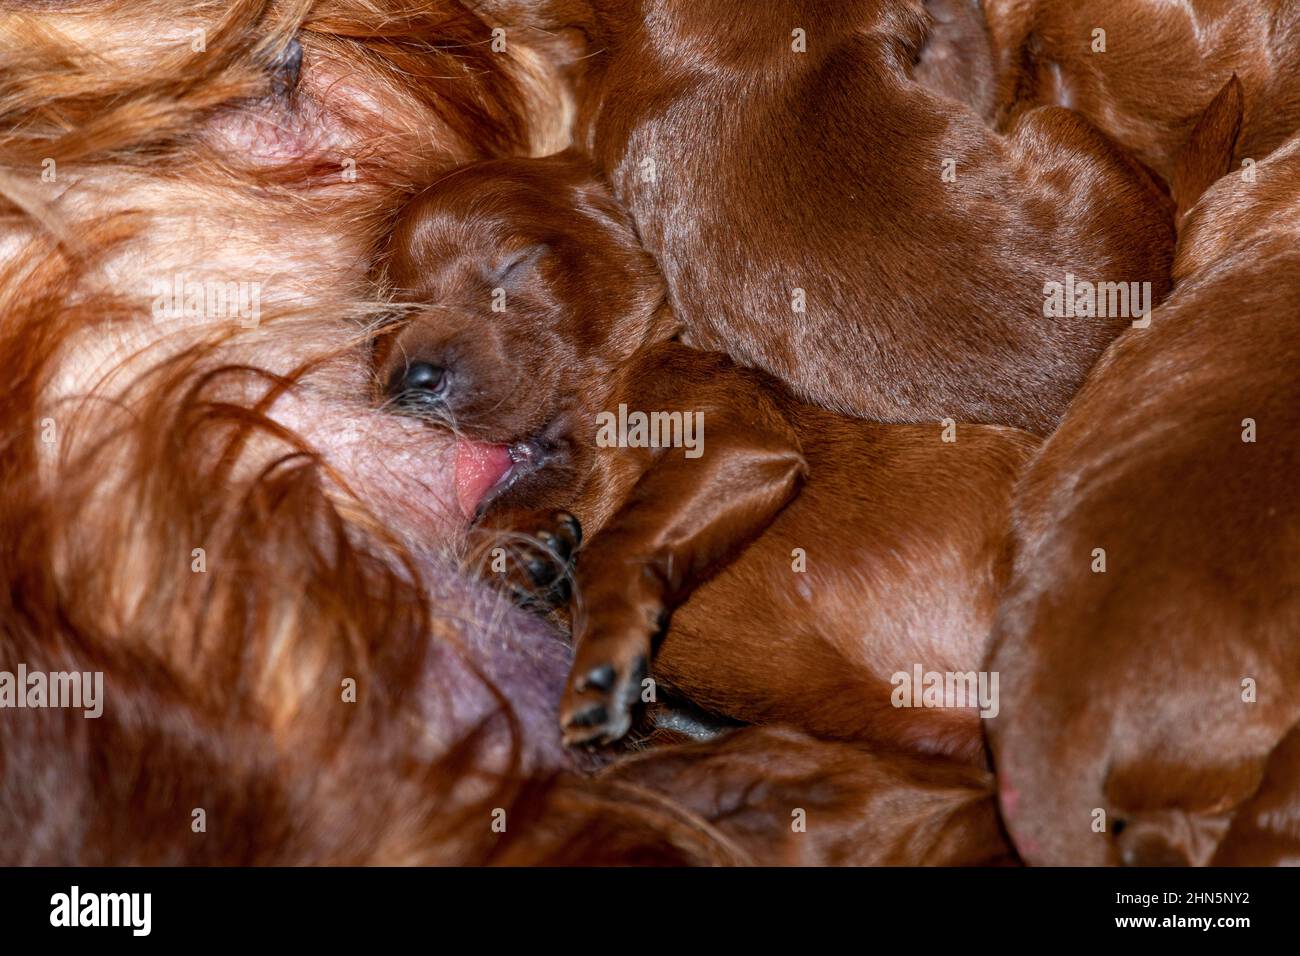 Five day old irish setter puppies feeding from mother in whelping box. Stock Photo